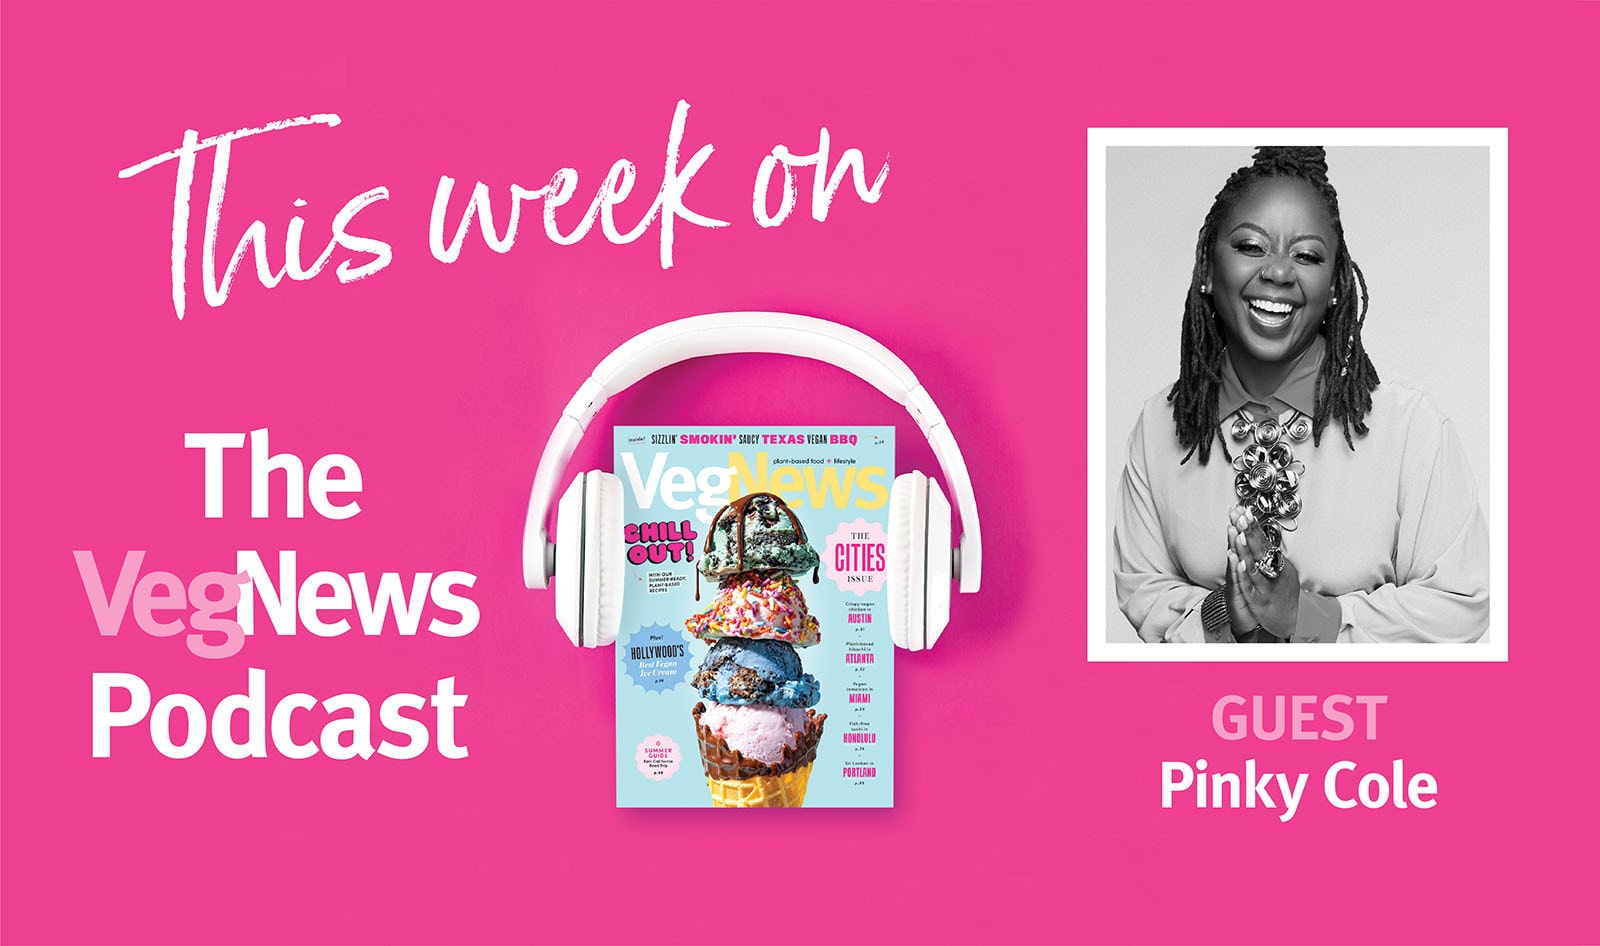 The VegNews Podcast Show Notes: Episode 4